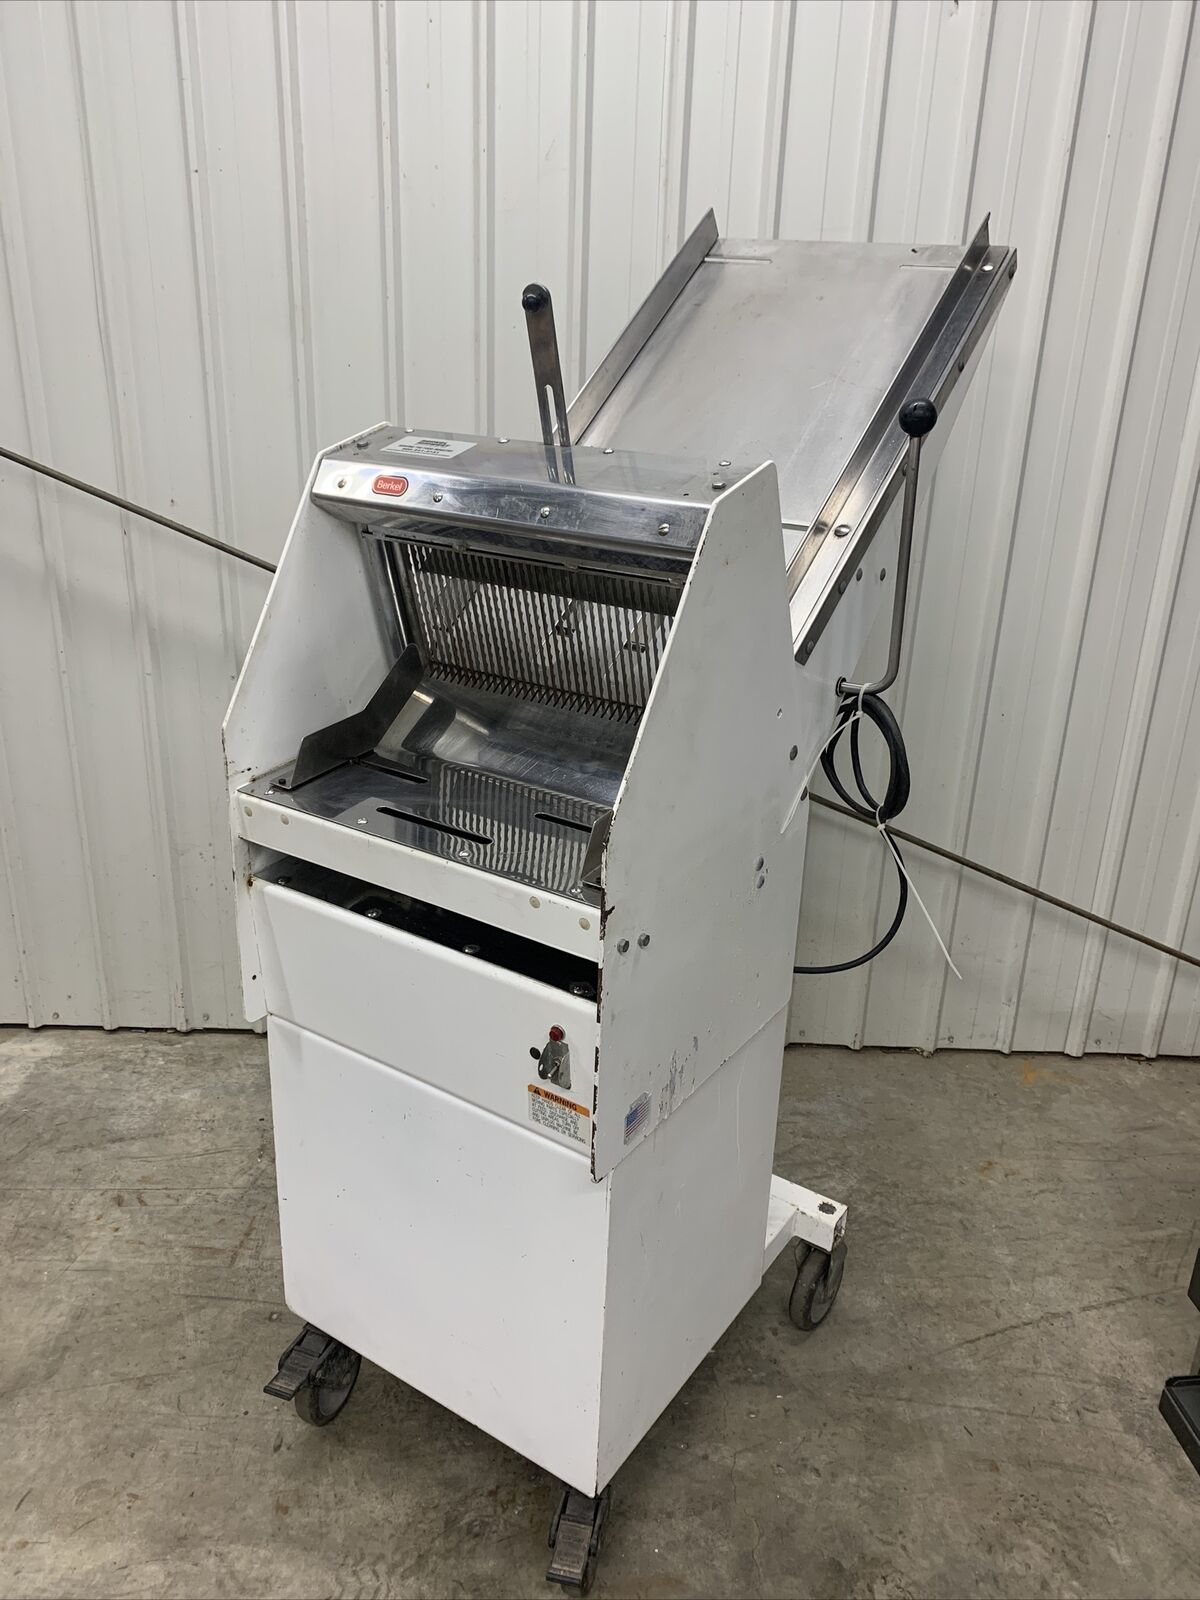 Berkel GMB 7/16" Commercial Bread Slicer with Stand